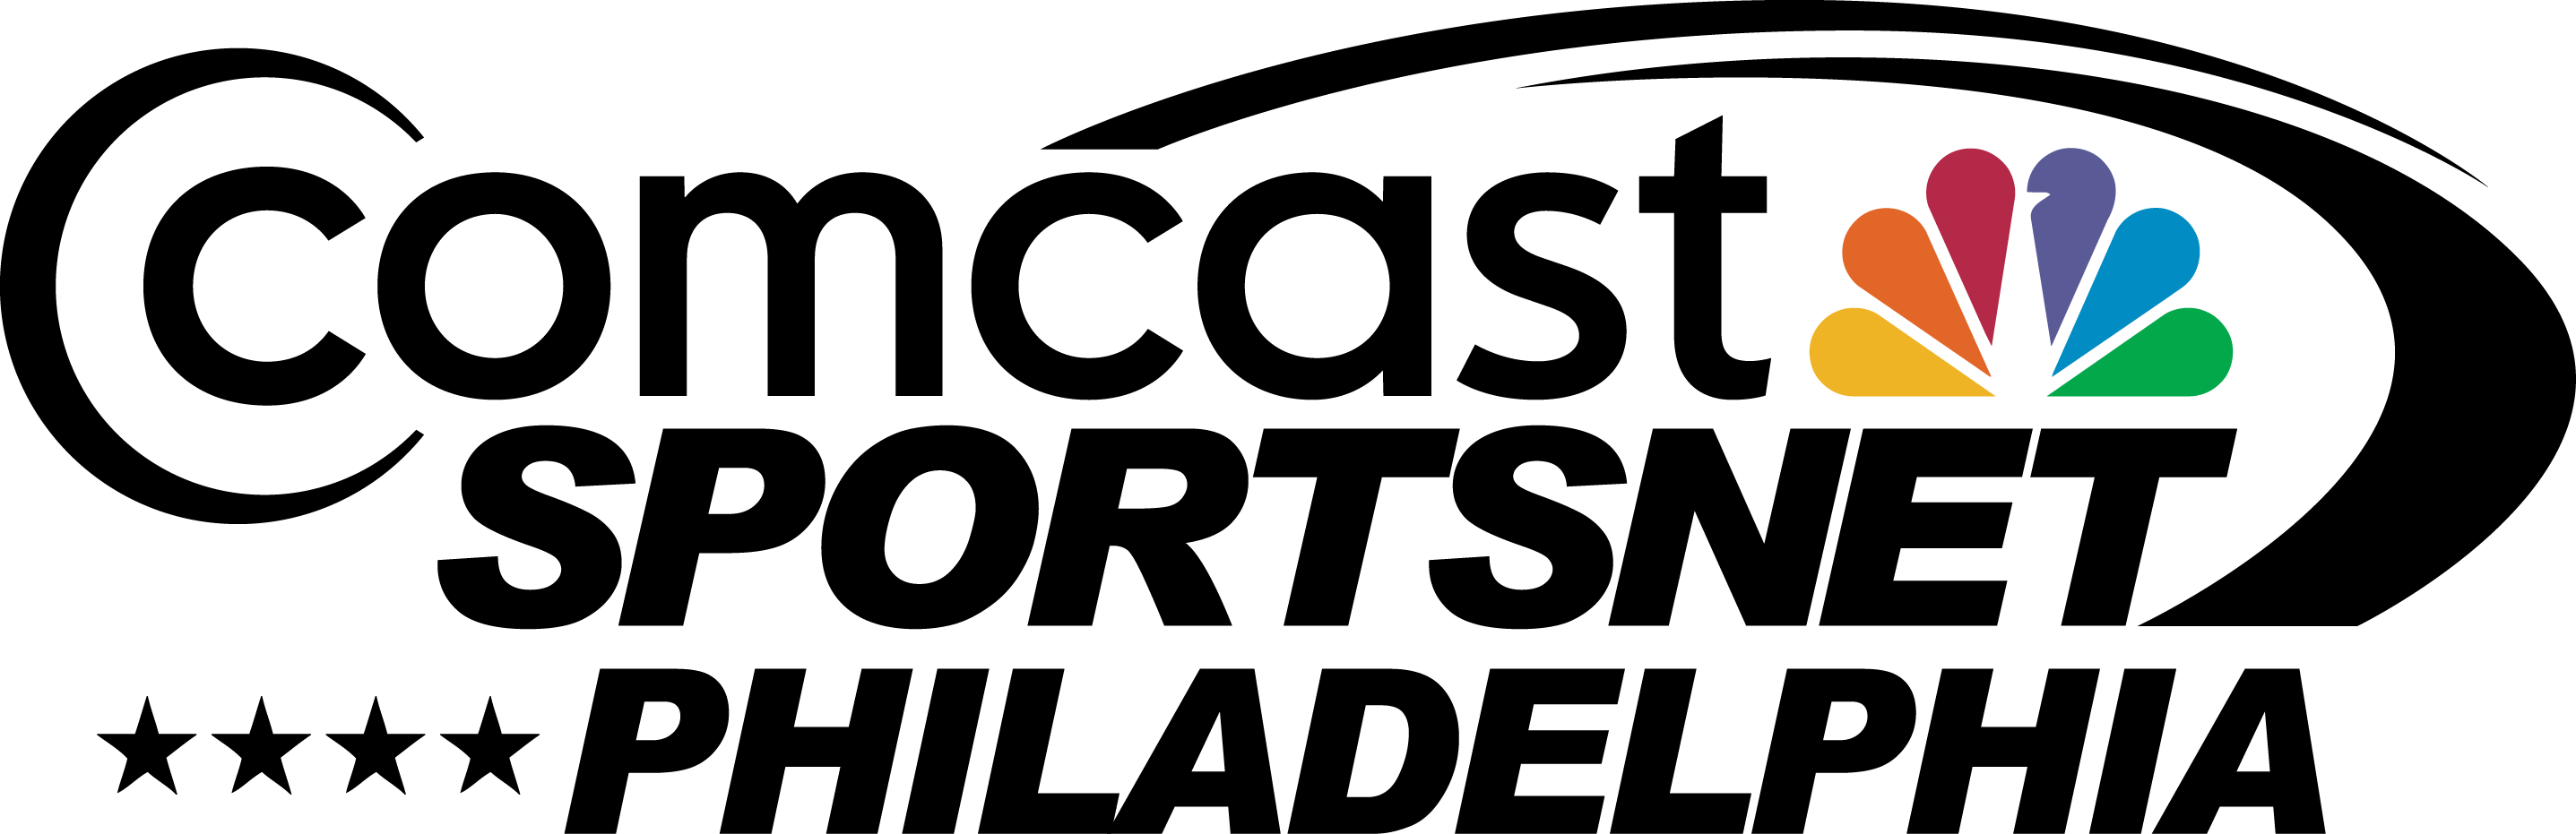 2008 Phillies World Series Champions Matt Stairs And Jamie Moyer Make Major League Broadcasting Debut On Comcast Sportsnet On March 31 Nbc Sports Pressboxnbc Sports Pressbox